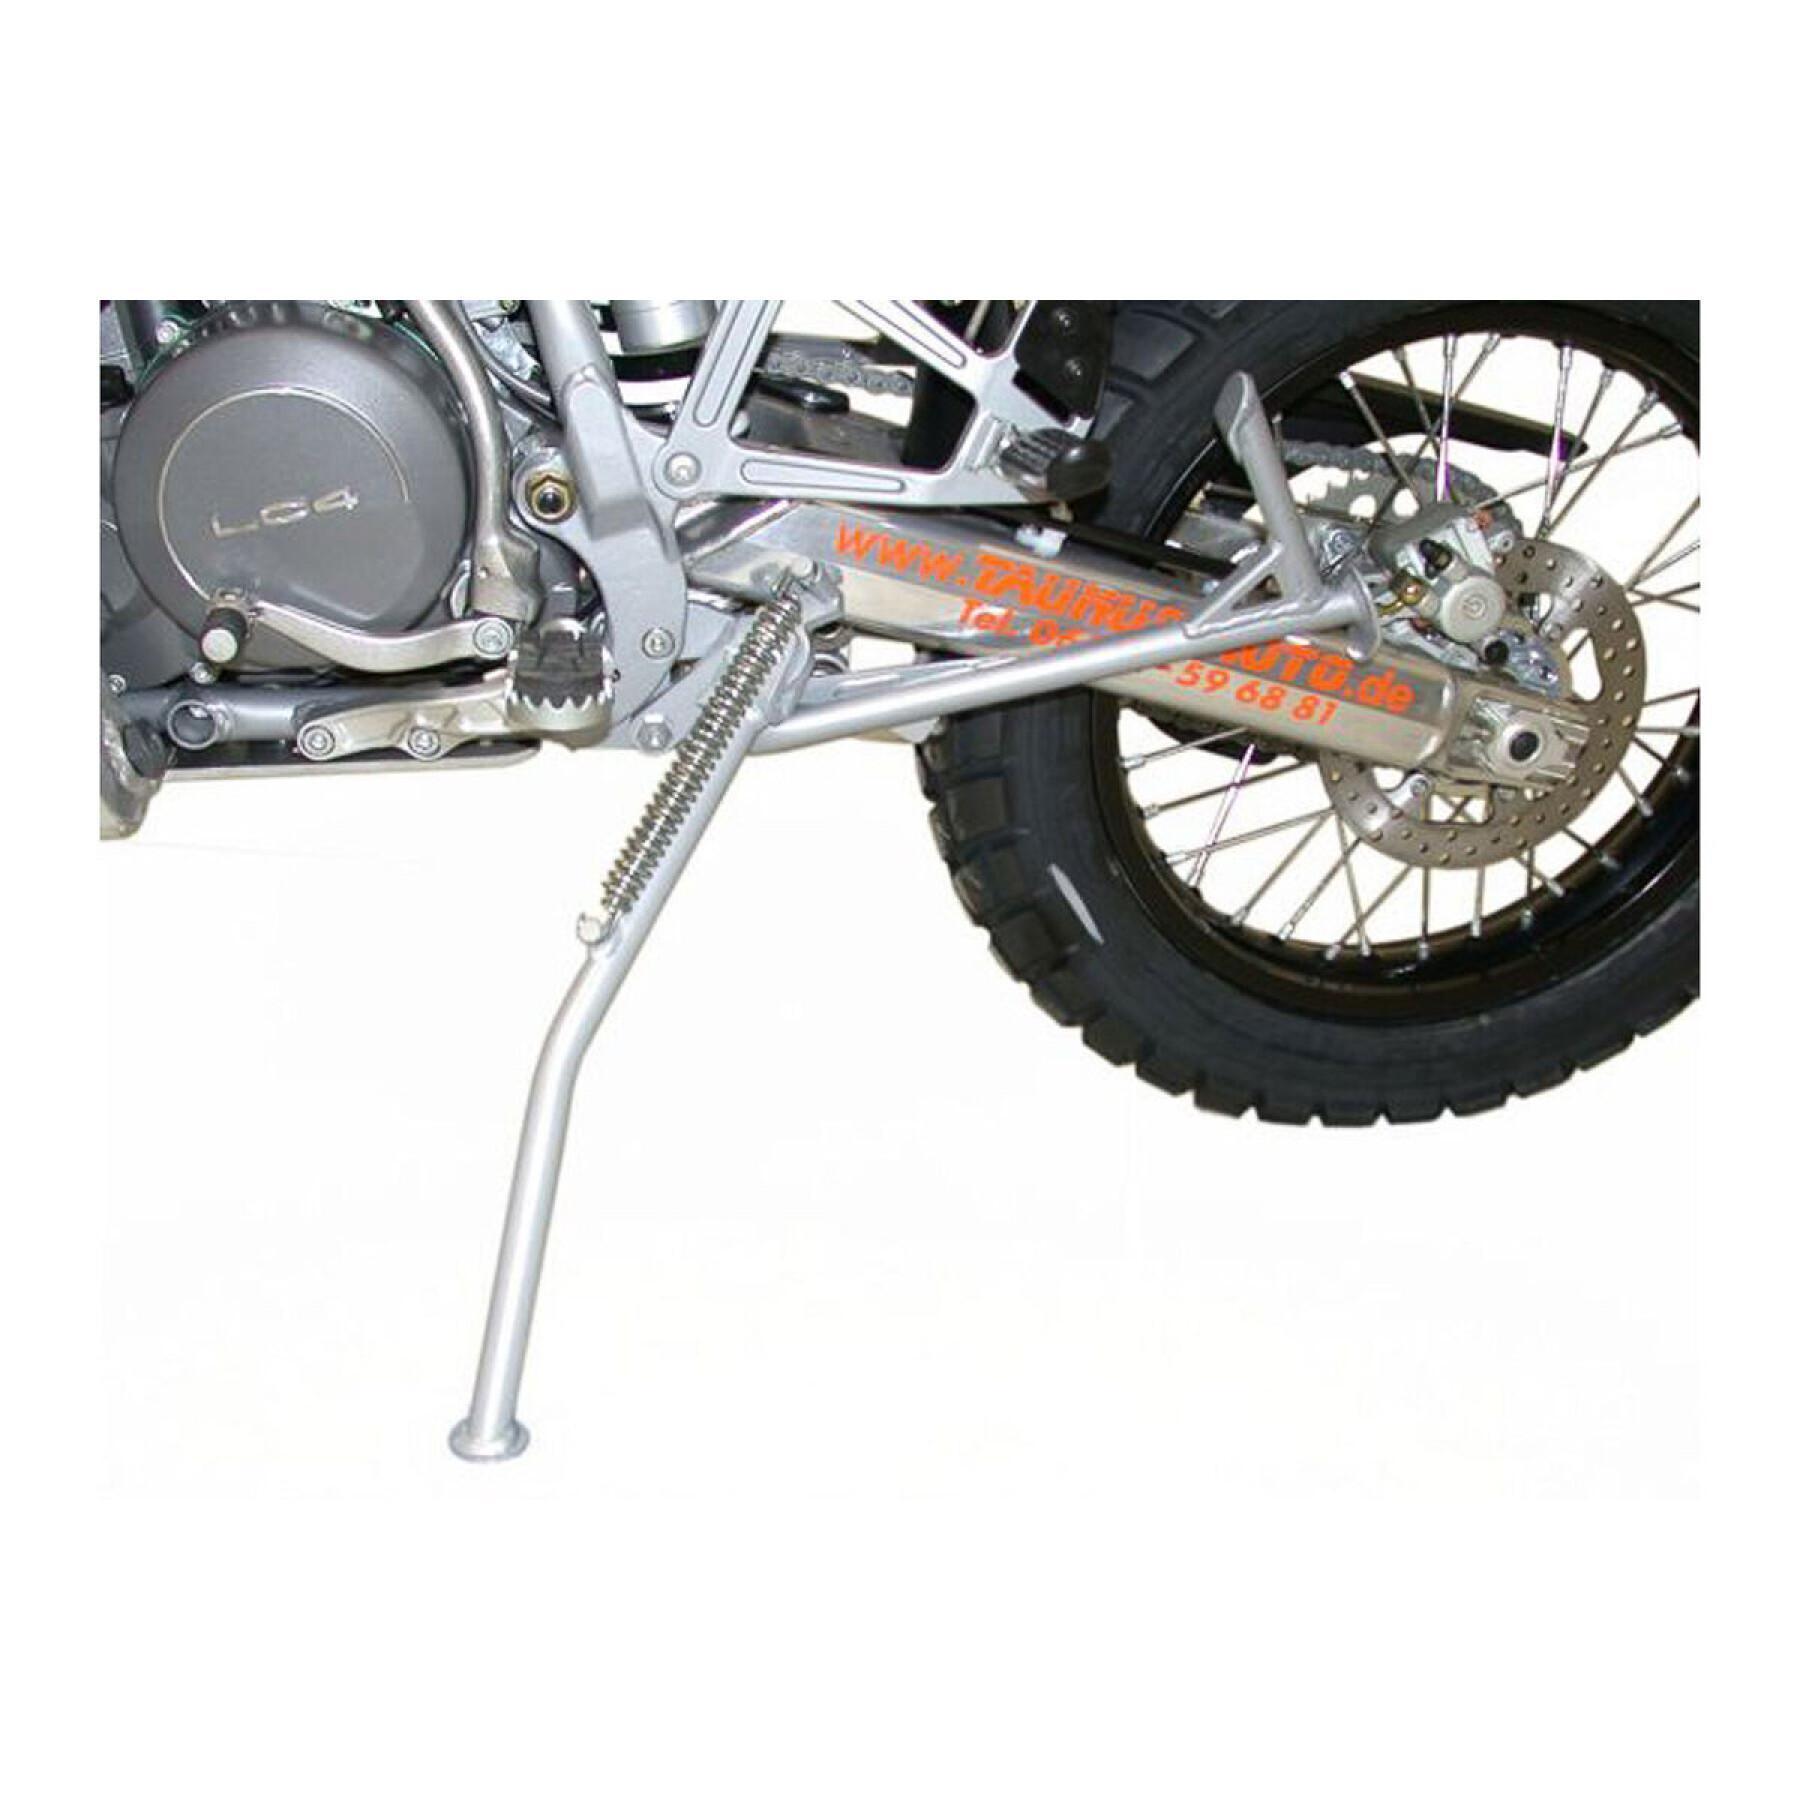 Side stand for center stand mounting SW-Motech